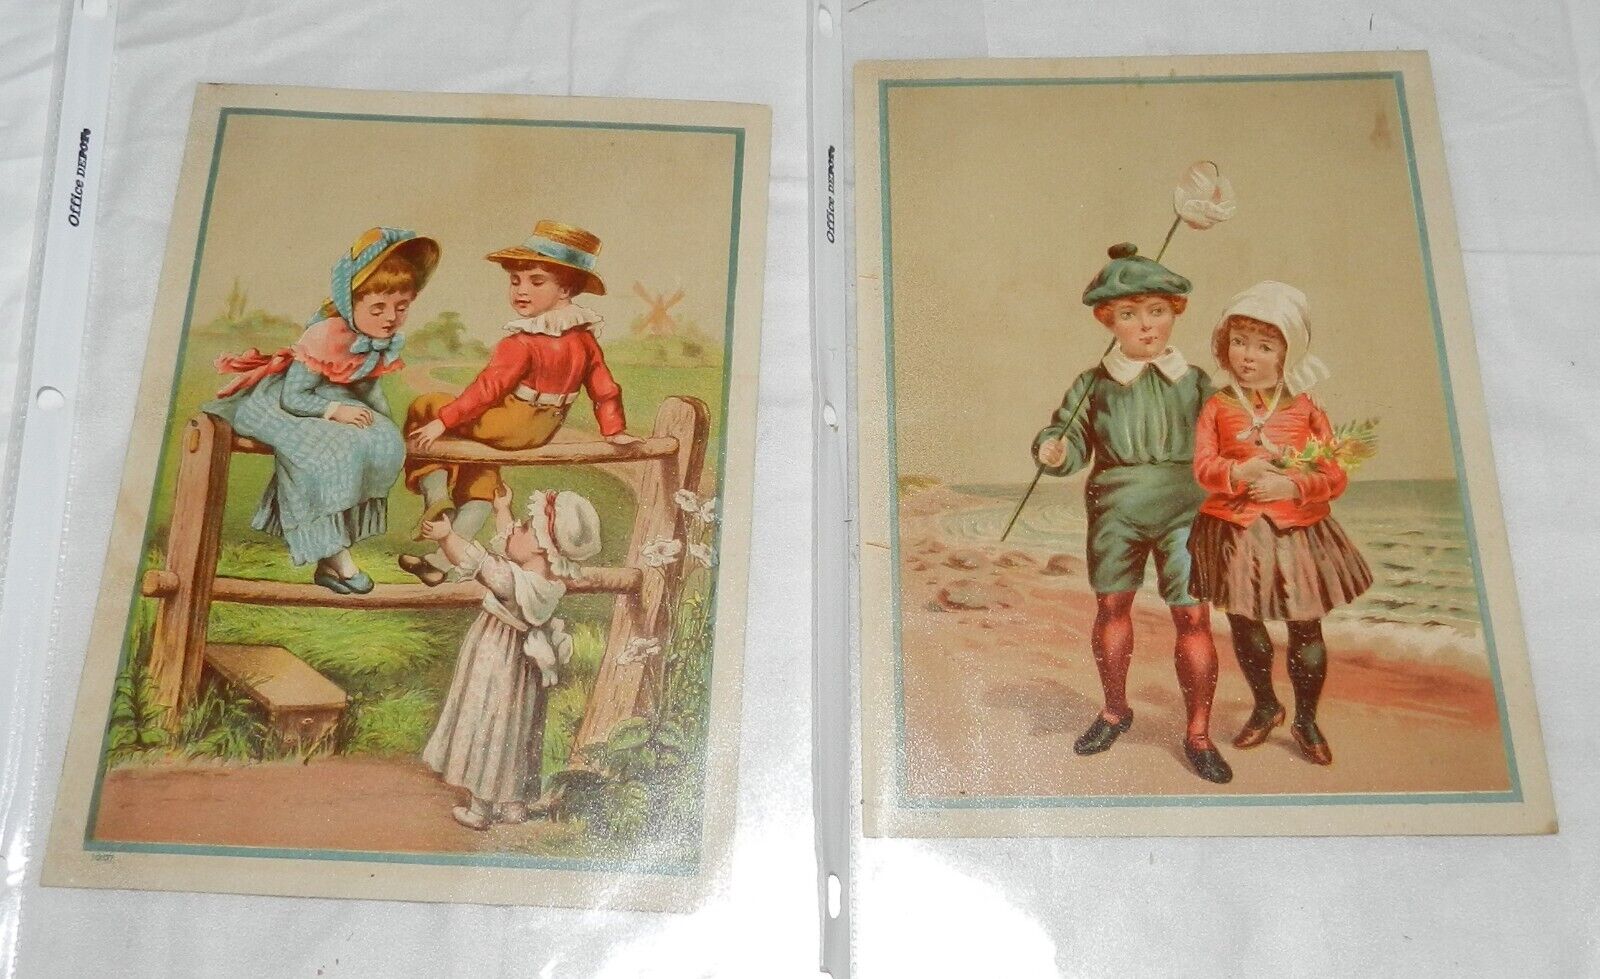 Lot of 2 Vintage Frameable Advertisements for Hall\'s Magic Hair Dye